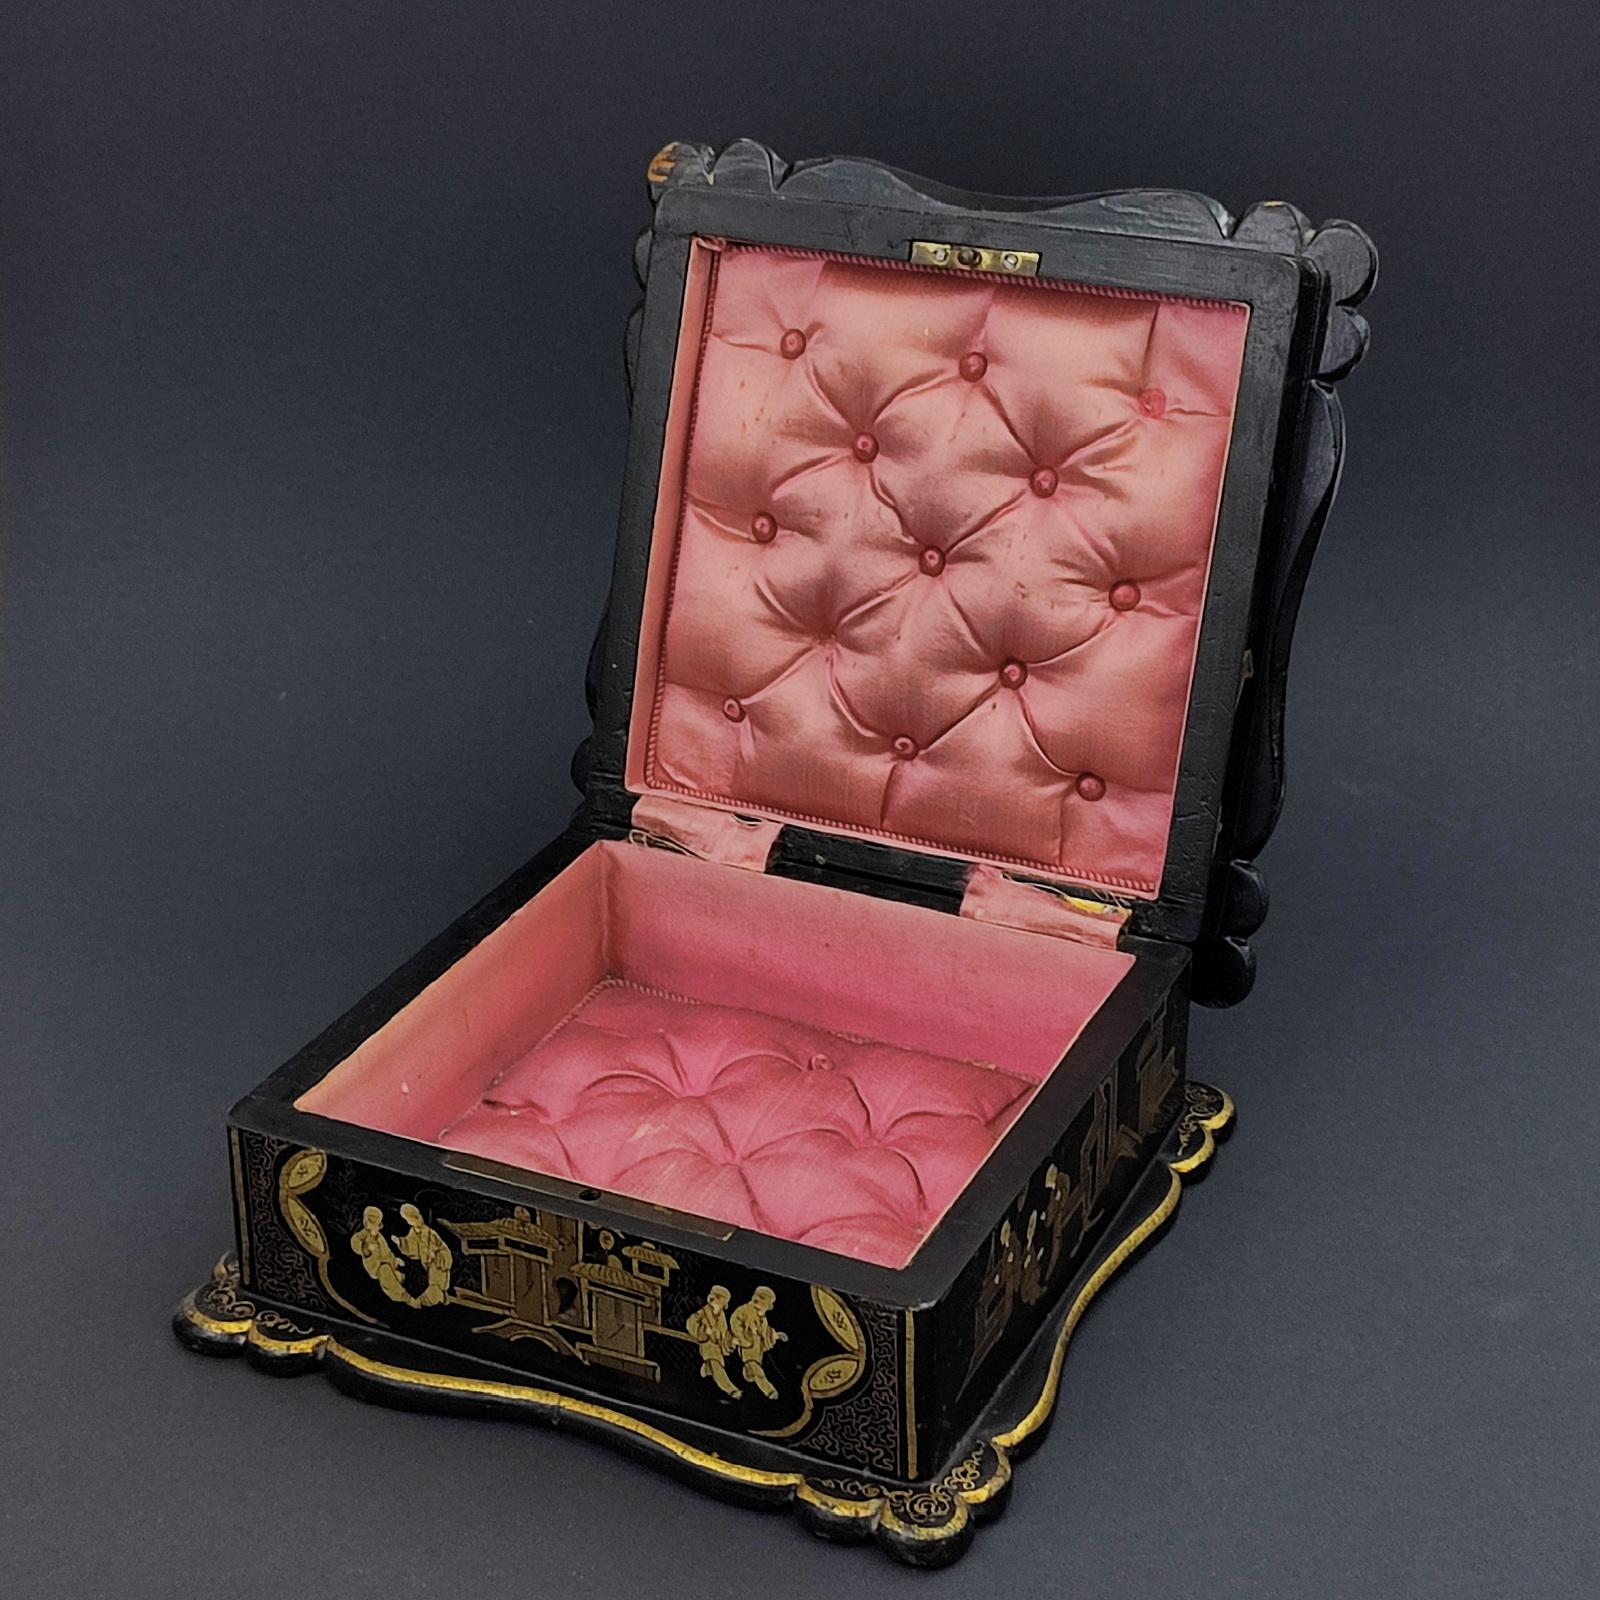 French Napoleon III Jewelry Box in Black Lacquer with Asian Decor, 19th Century  For Sale 4